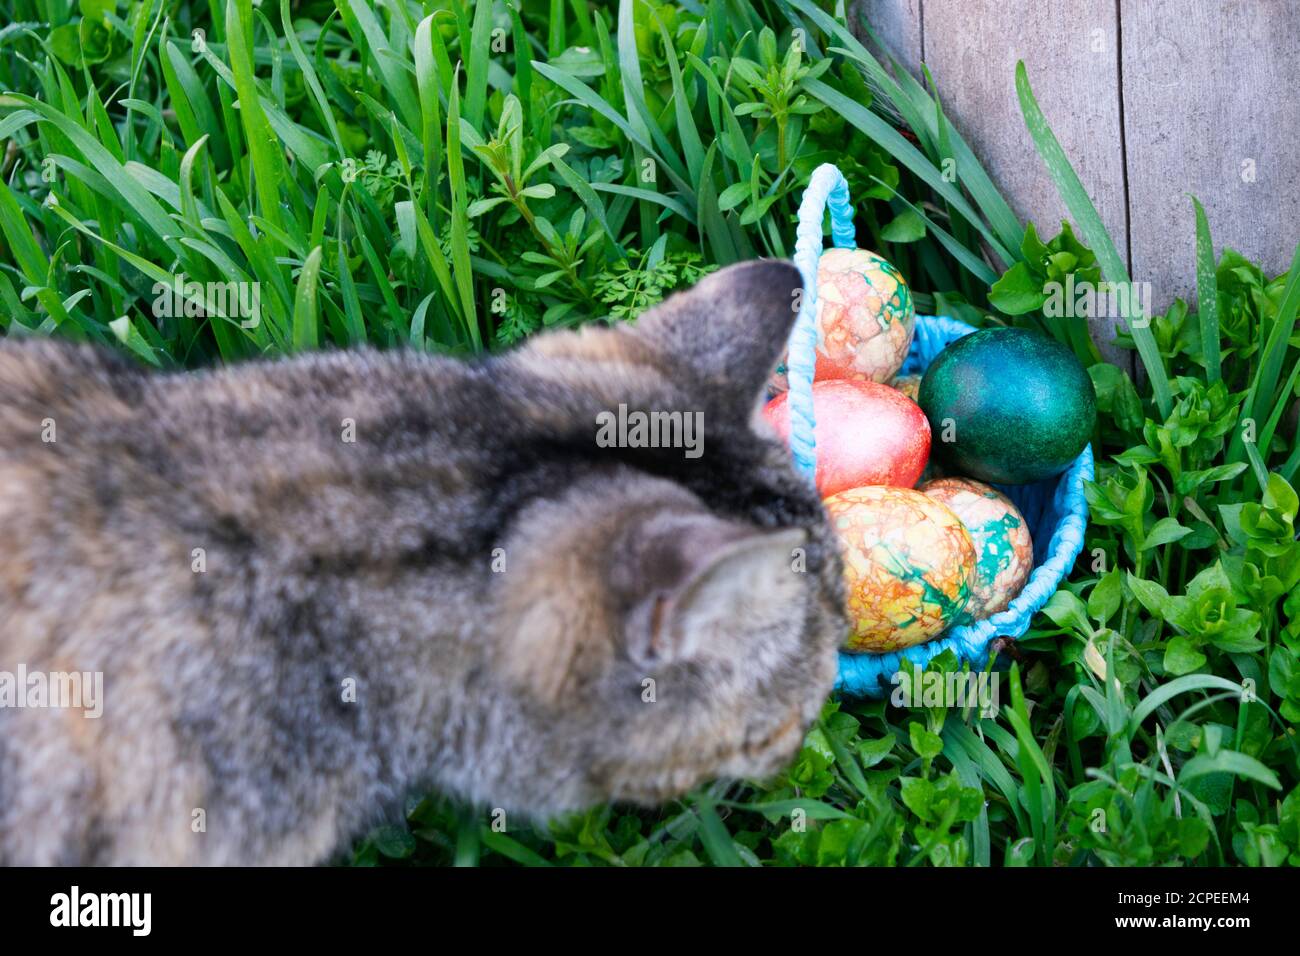 curiously gray cat sniffs the blue basket with Easter eggs standing on the green grass near the stump Stock Photo